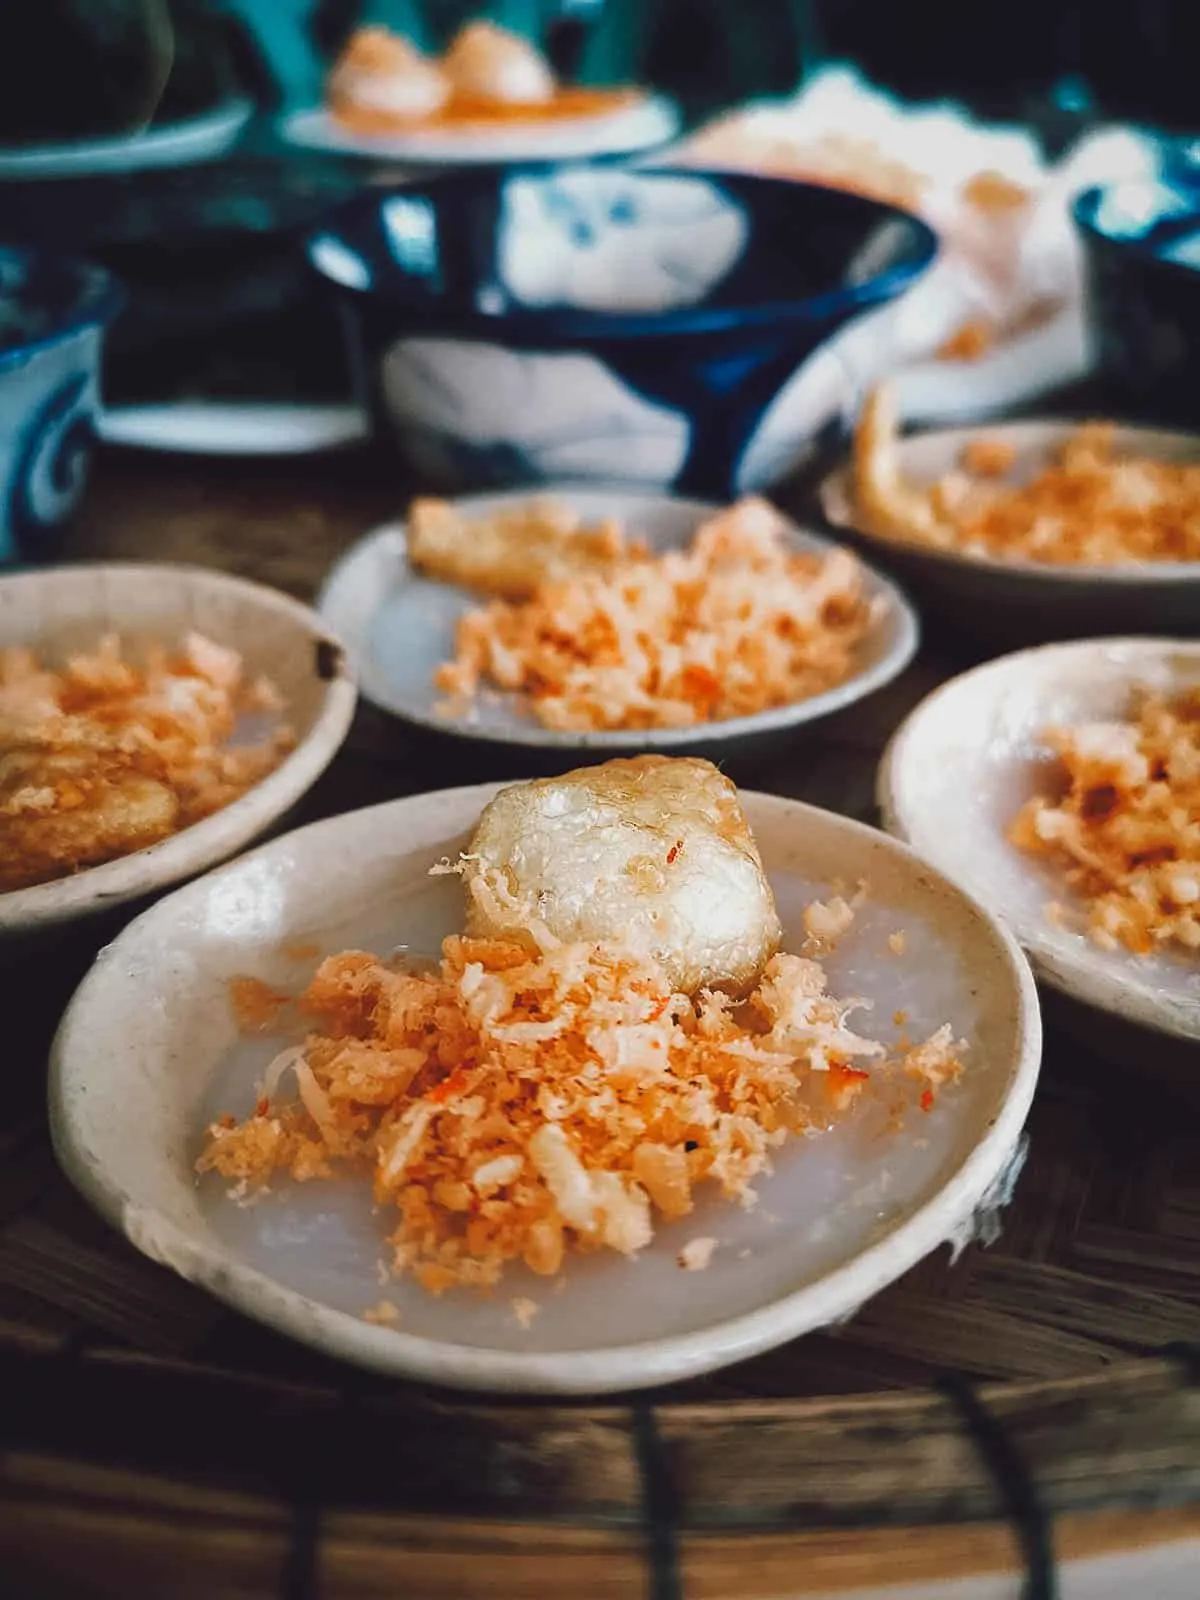 Small plates of banh beo